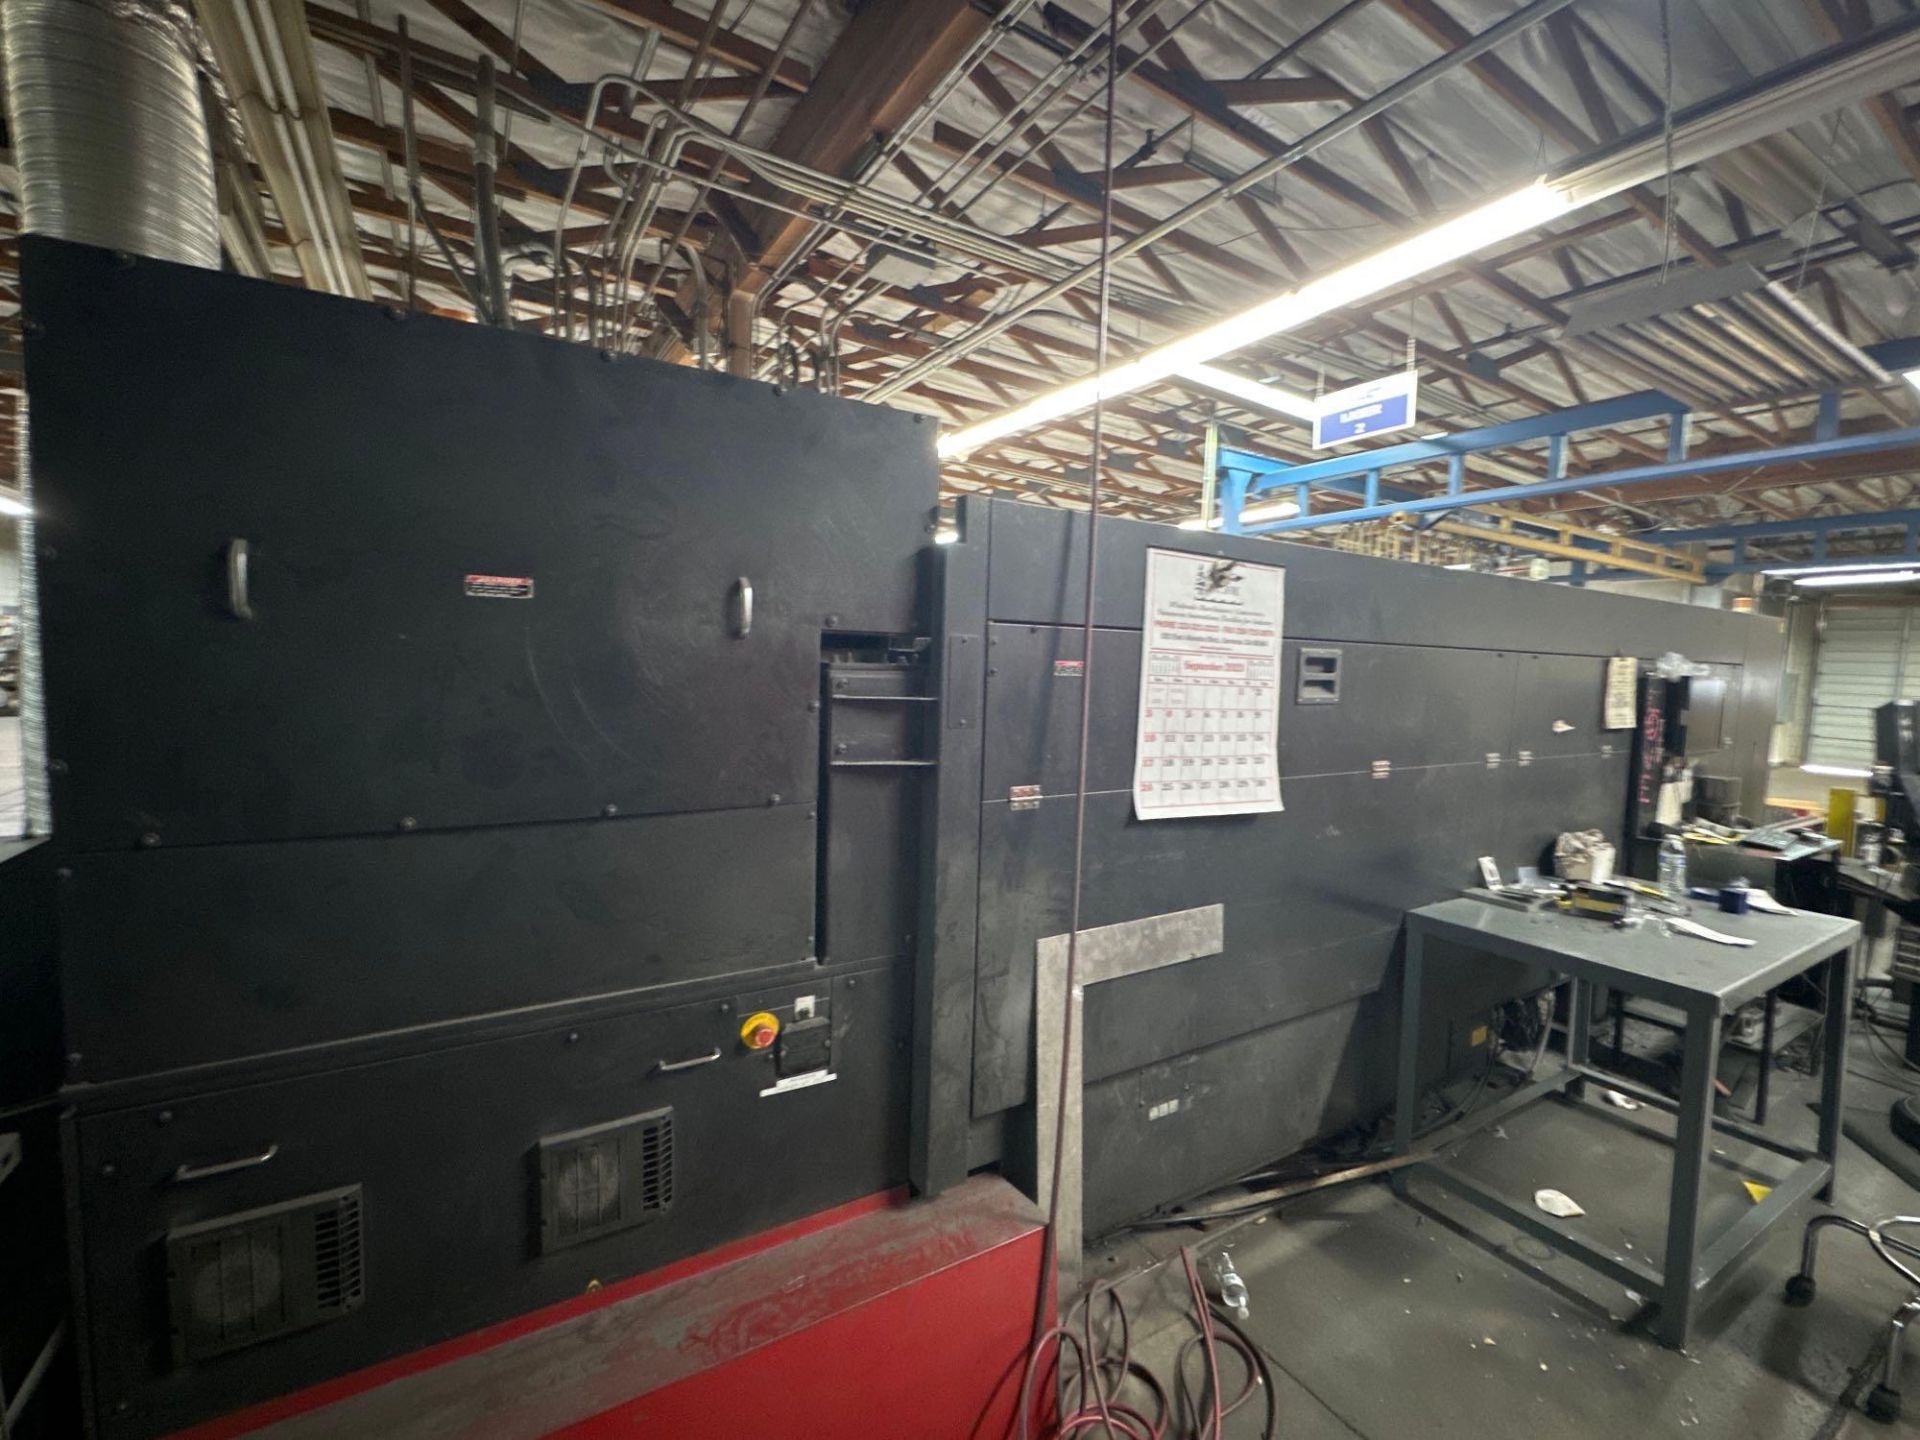 4000W AMADA FO-3015NT CO2 LASER, 2005 - 5' X 10' TABLE - INCLUDES DONALDSON TORIT DUST COLLECTOR - Image 18 of 23